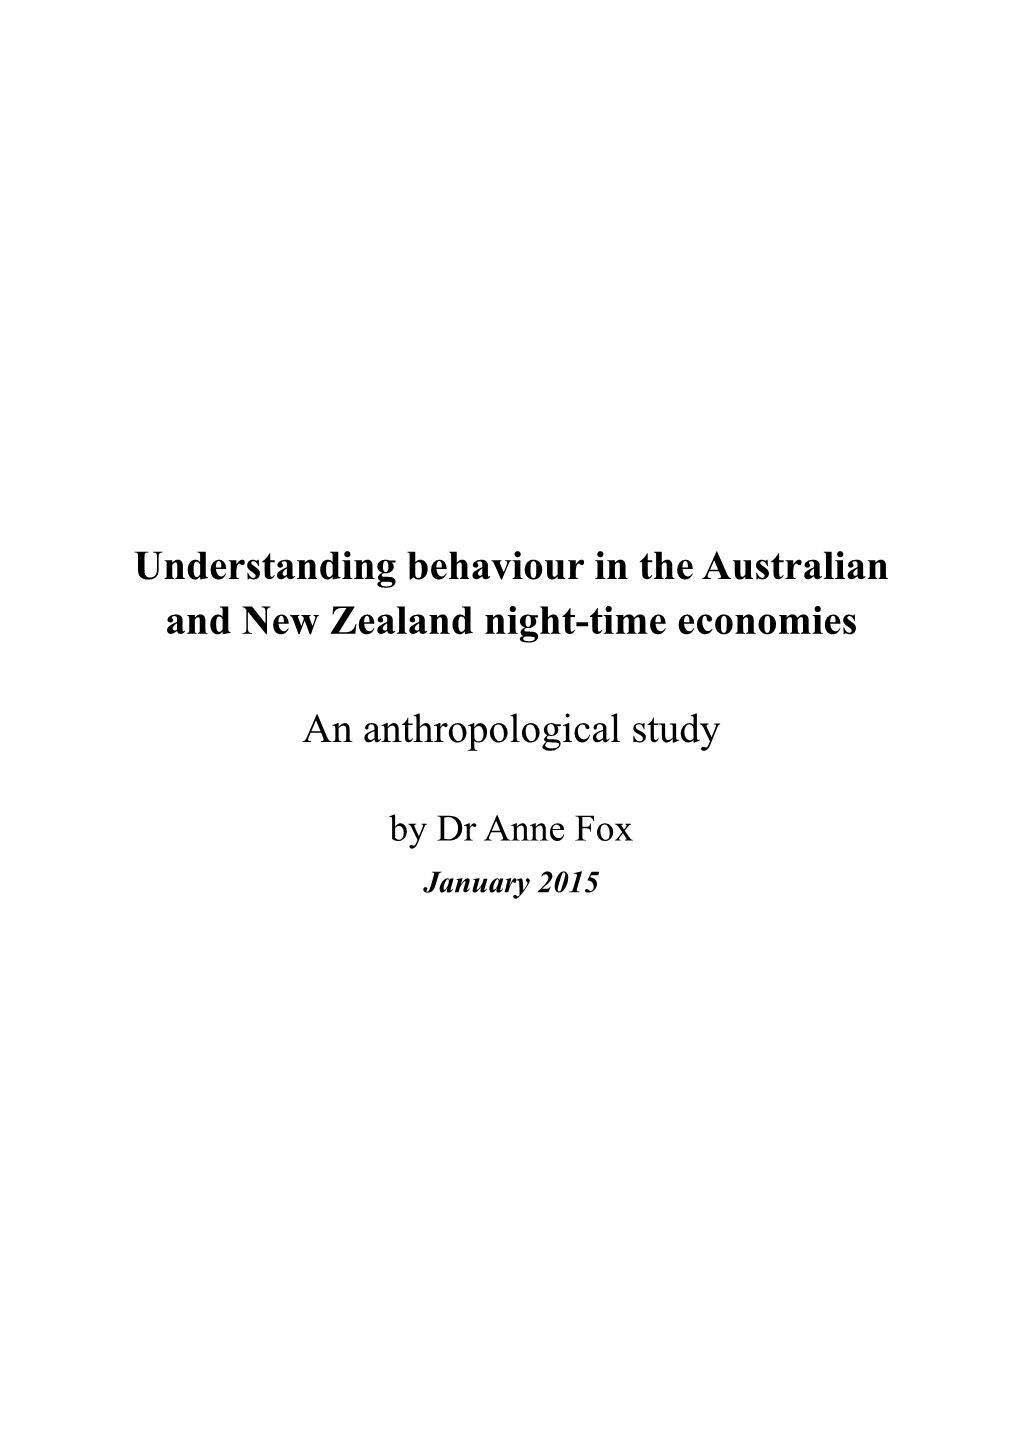 Understanding Behaviour in the Australian and New Zealand Night-Time Economies an Anthropological Study